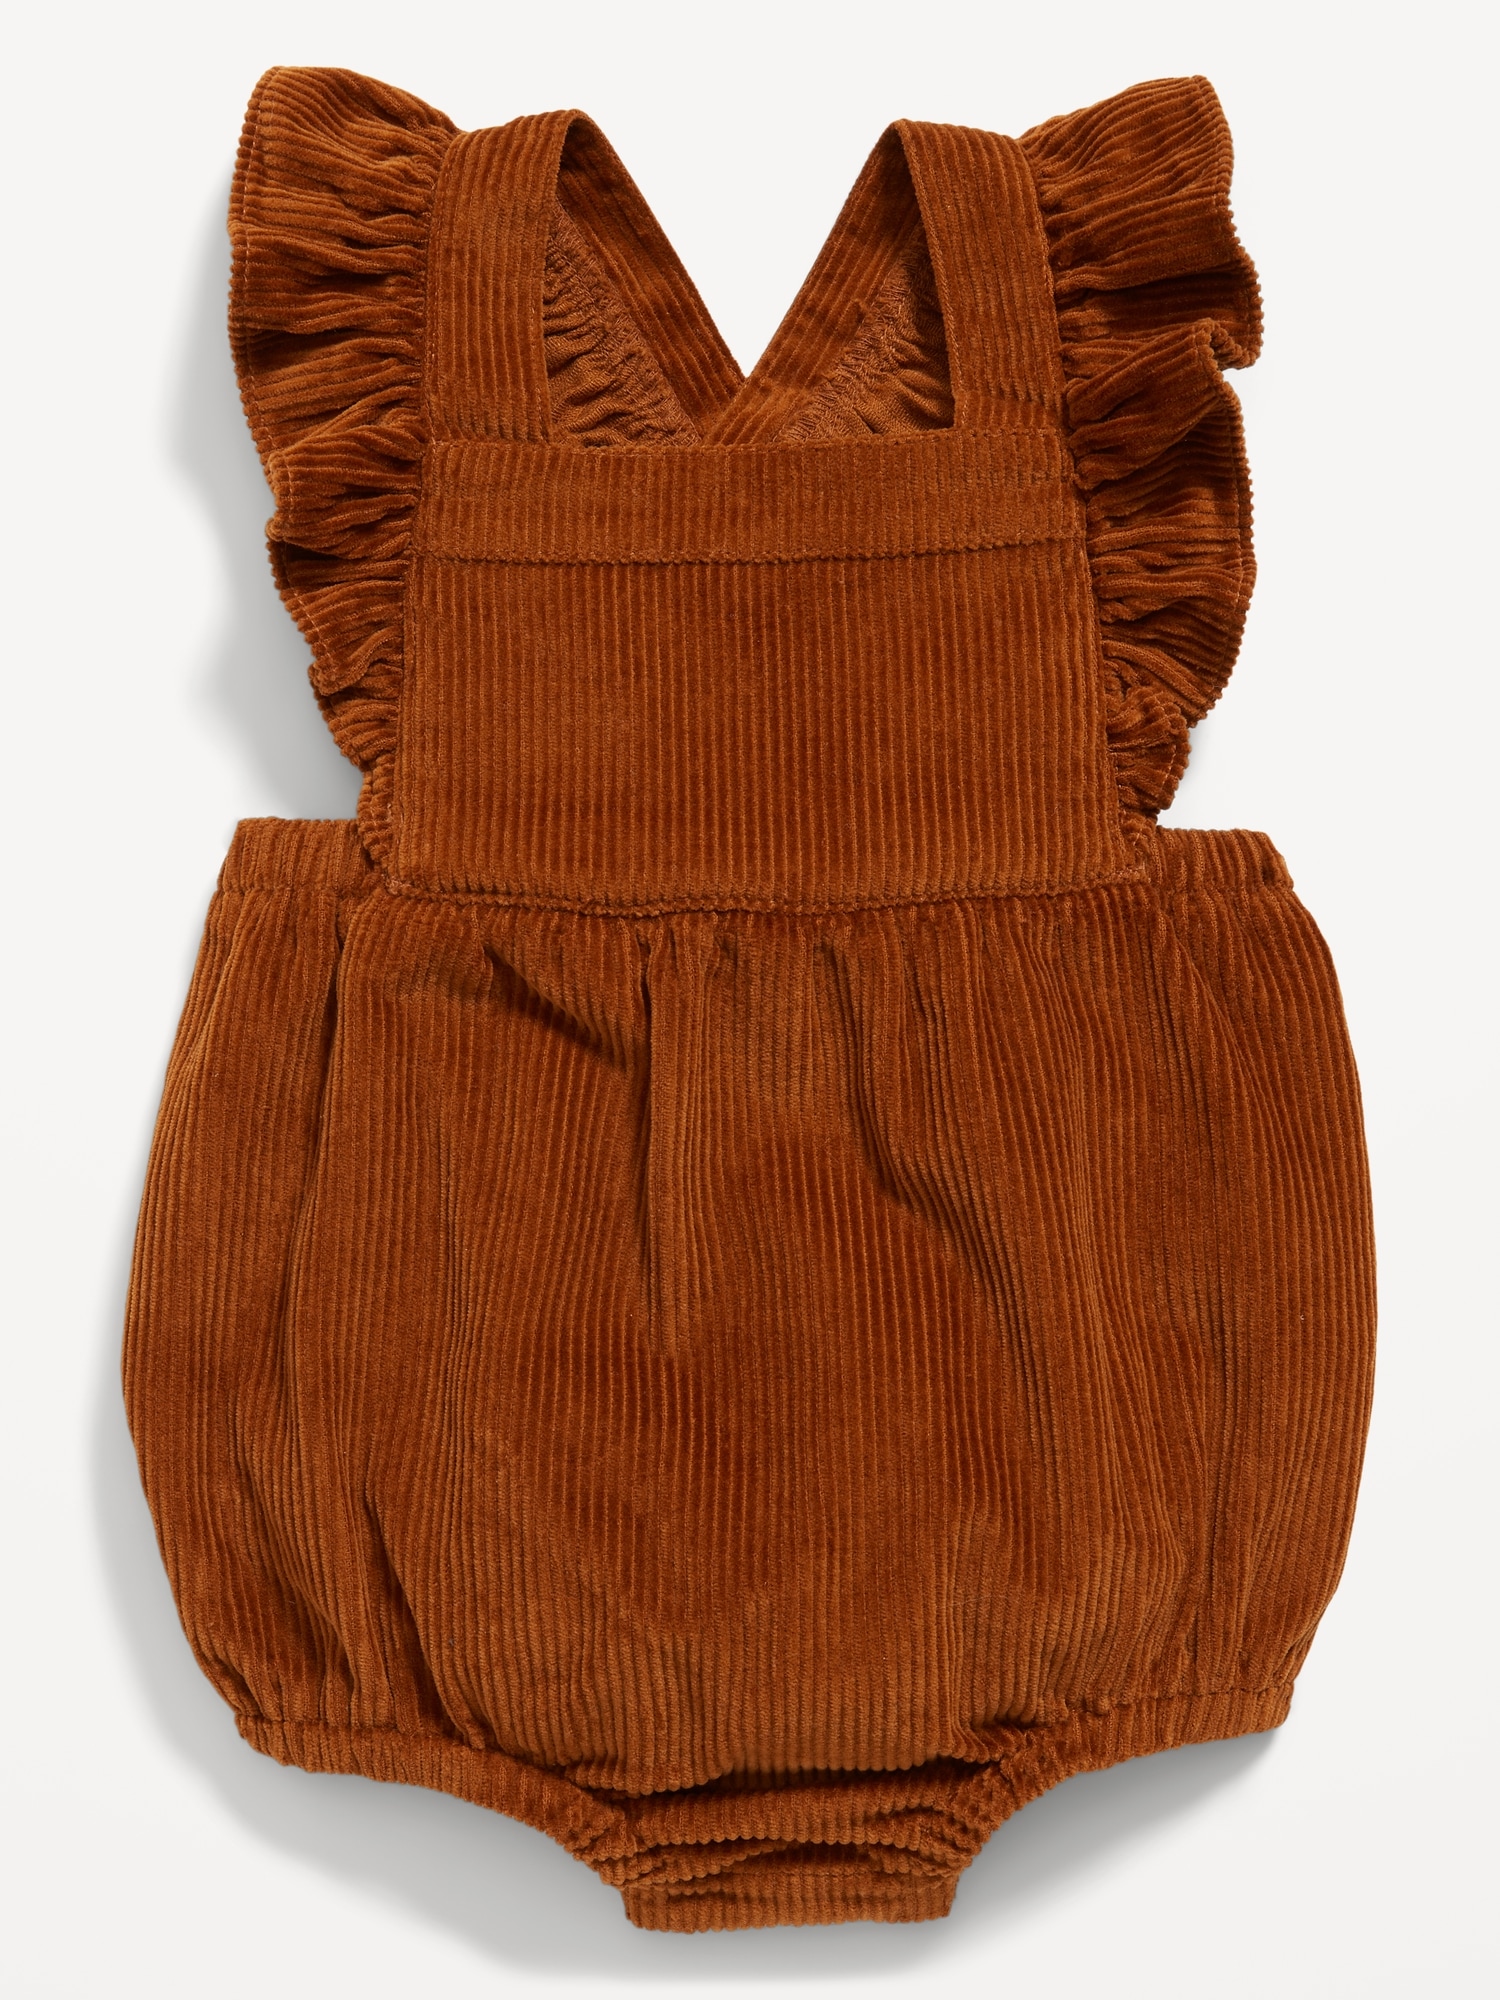 Ruffled Corduroy Overall Romper for Baby | Old Navy